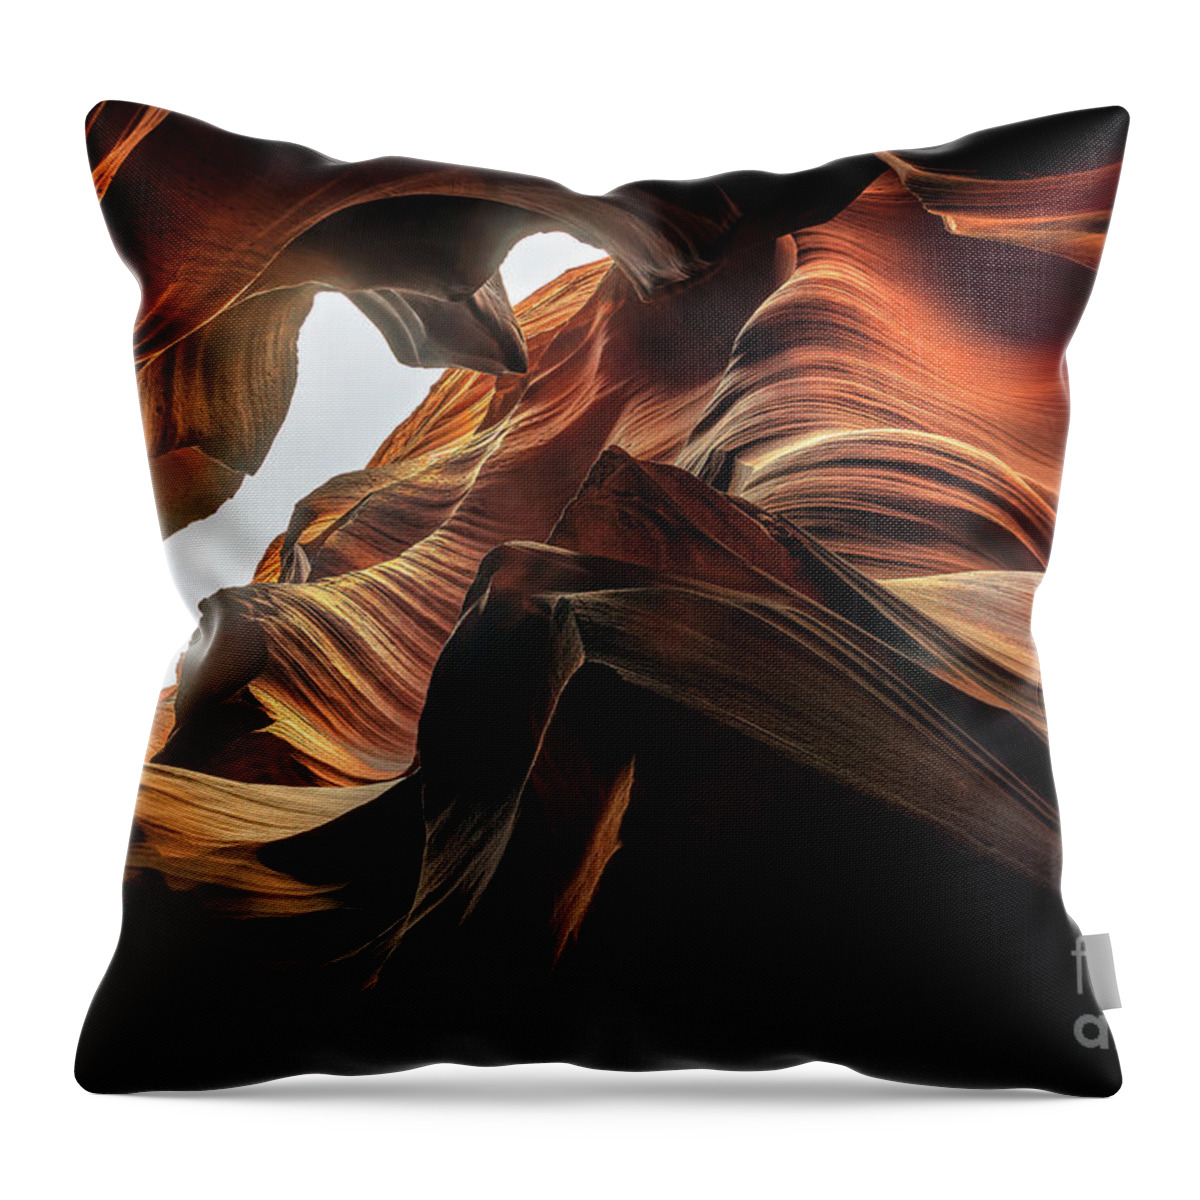 Sandstone Canyons Throw Pillow featuring the photograph Sandstone Canyons by Doug Sturgess